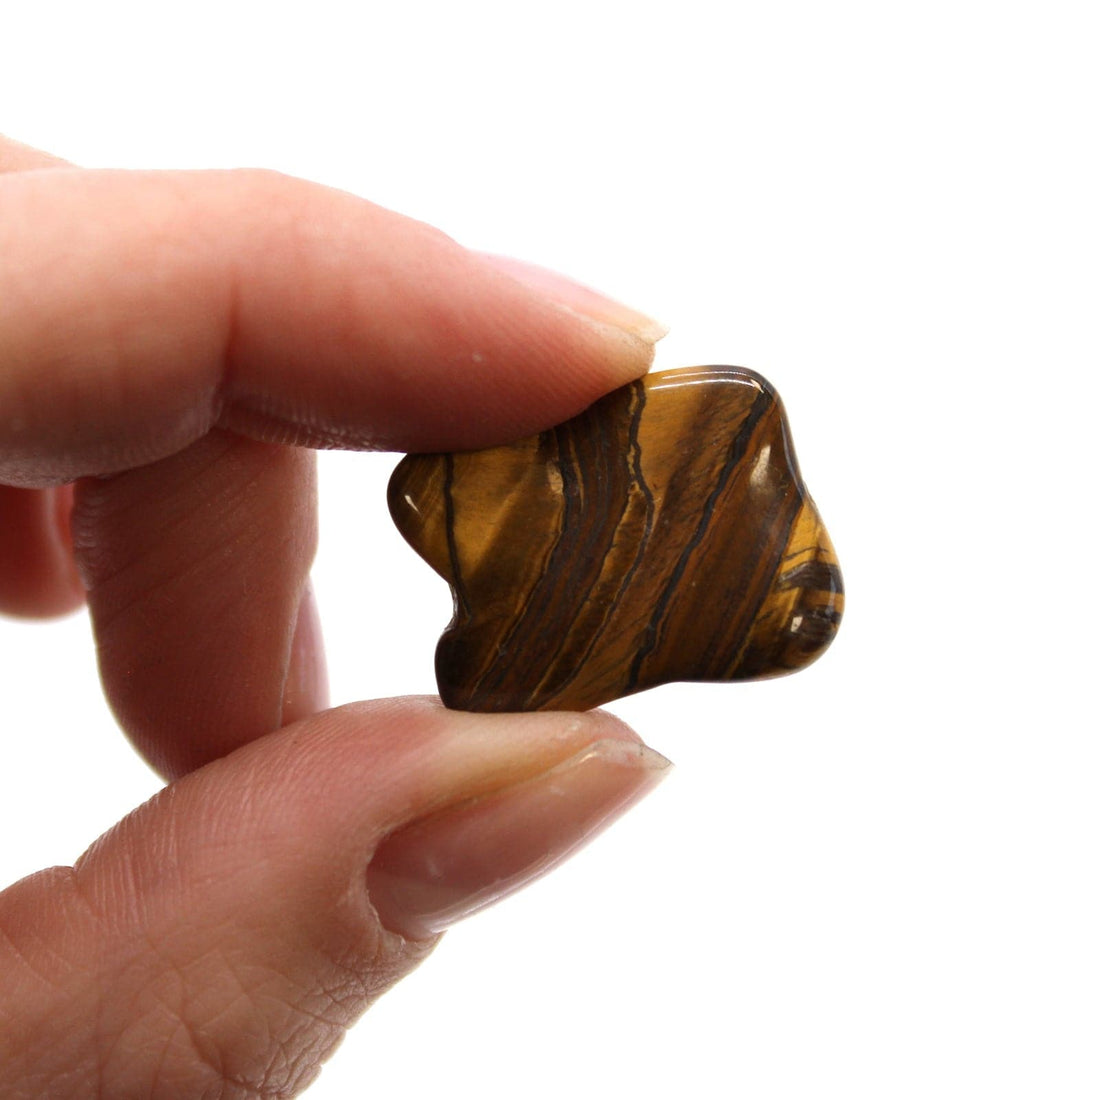 Small African Tumble Stones - Tigers Eye - Golden - best price from Maltashopper.com ATUMBLES-10